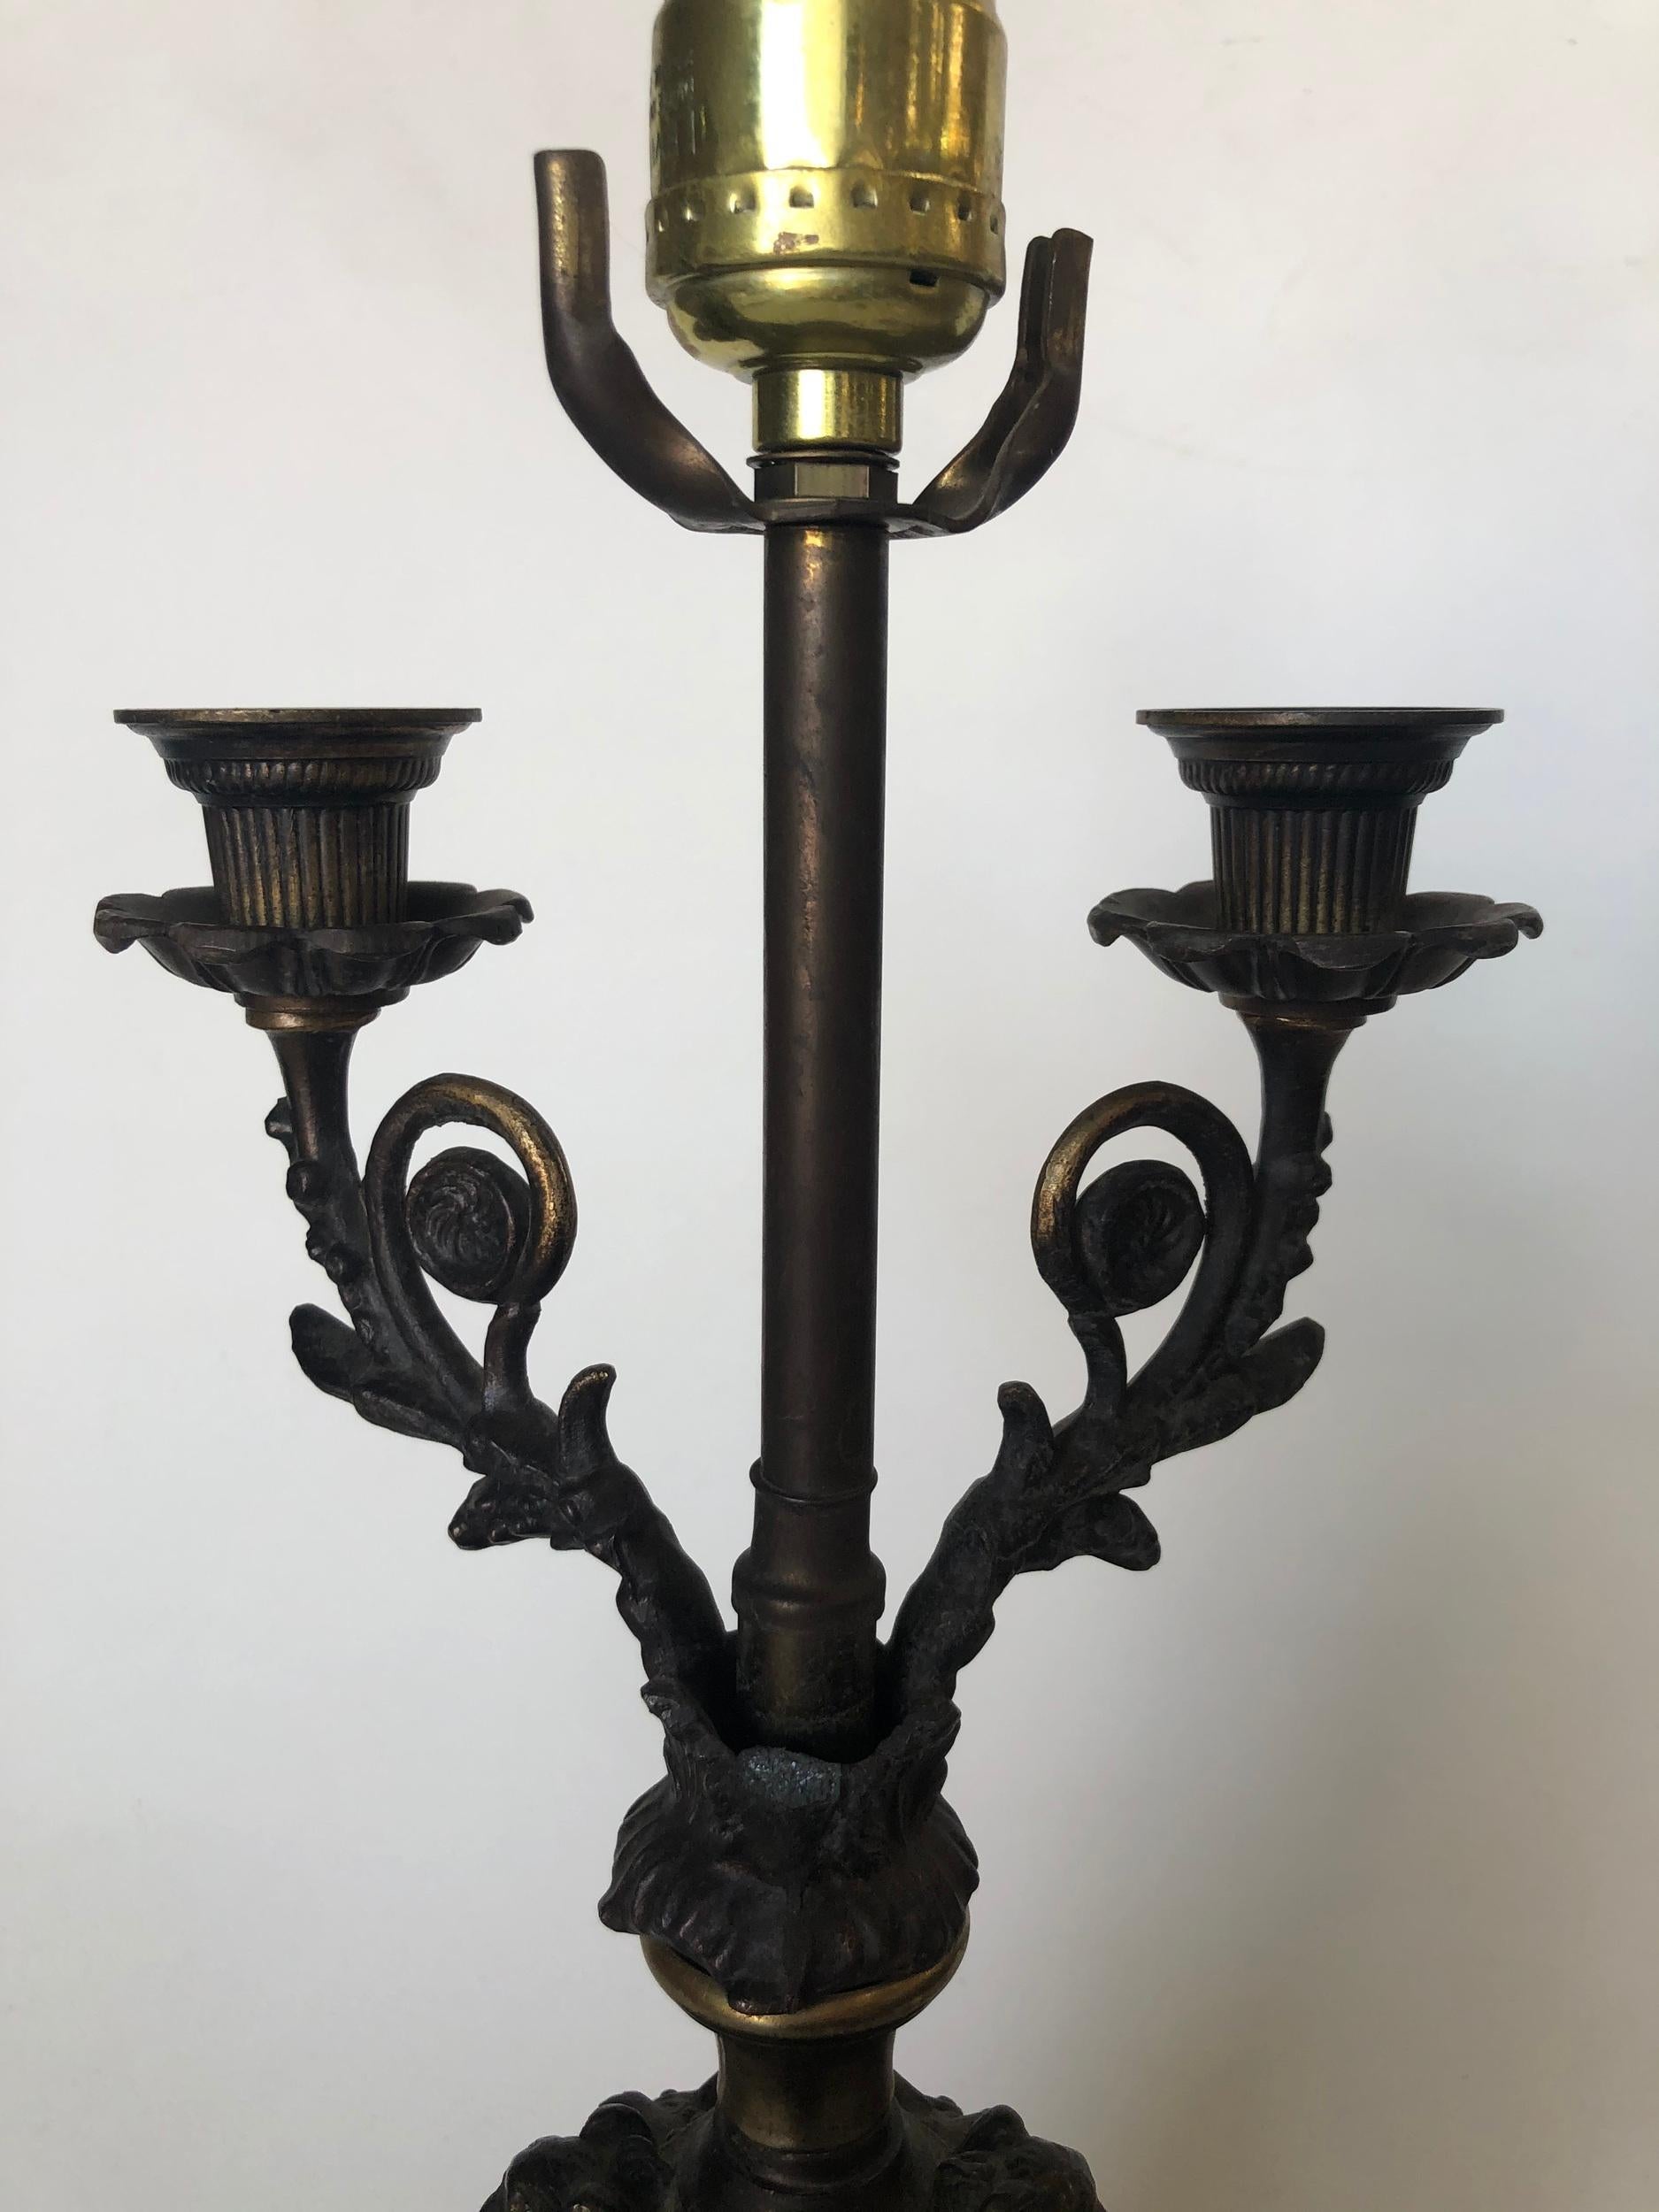 Regency bronze cherub candelabra table lamp featuring a single light socket and two candleholders.

Measures: 19